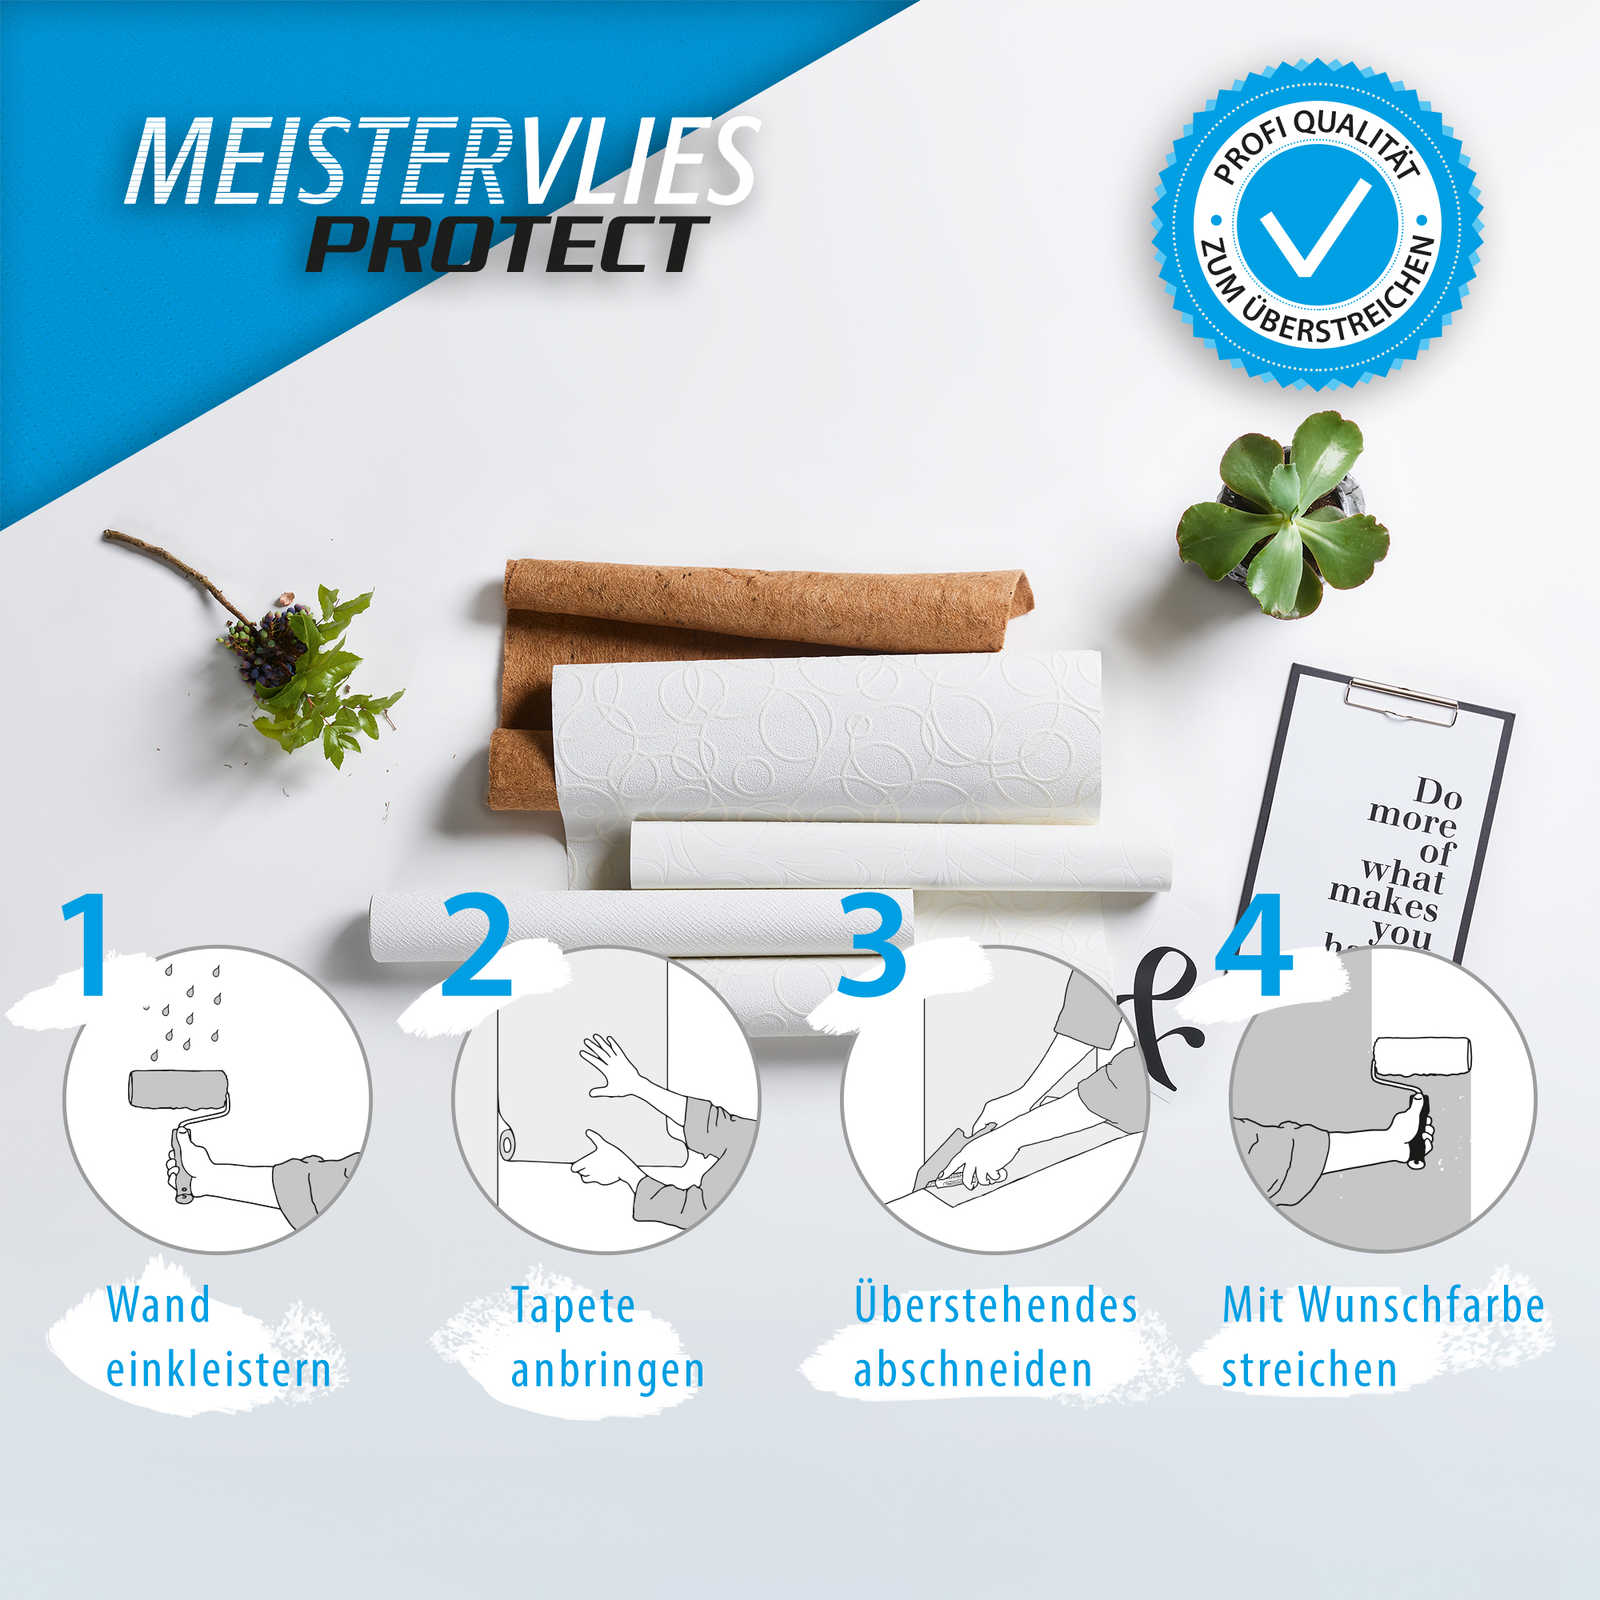             Glad vliesbehang Meistervlies Protect - wit
        